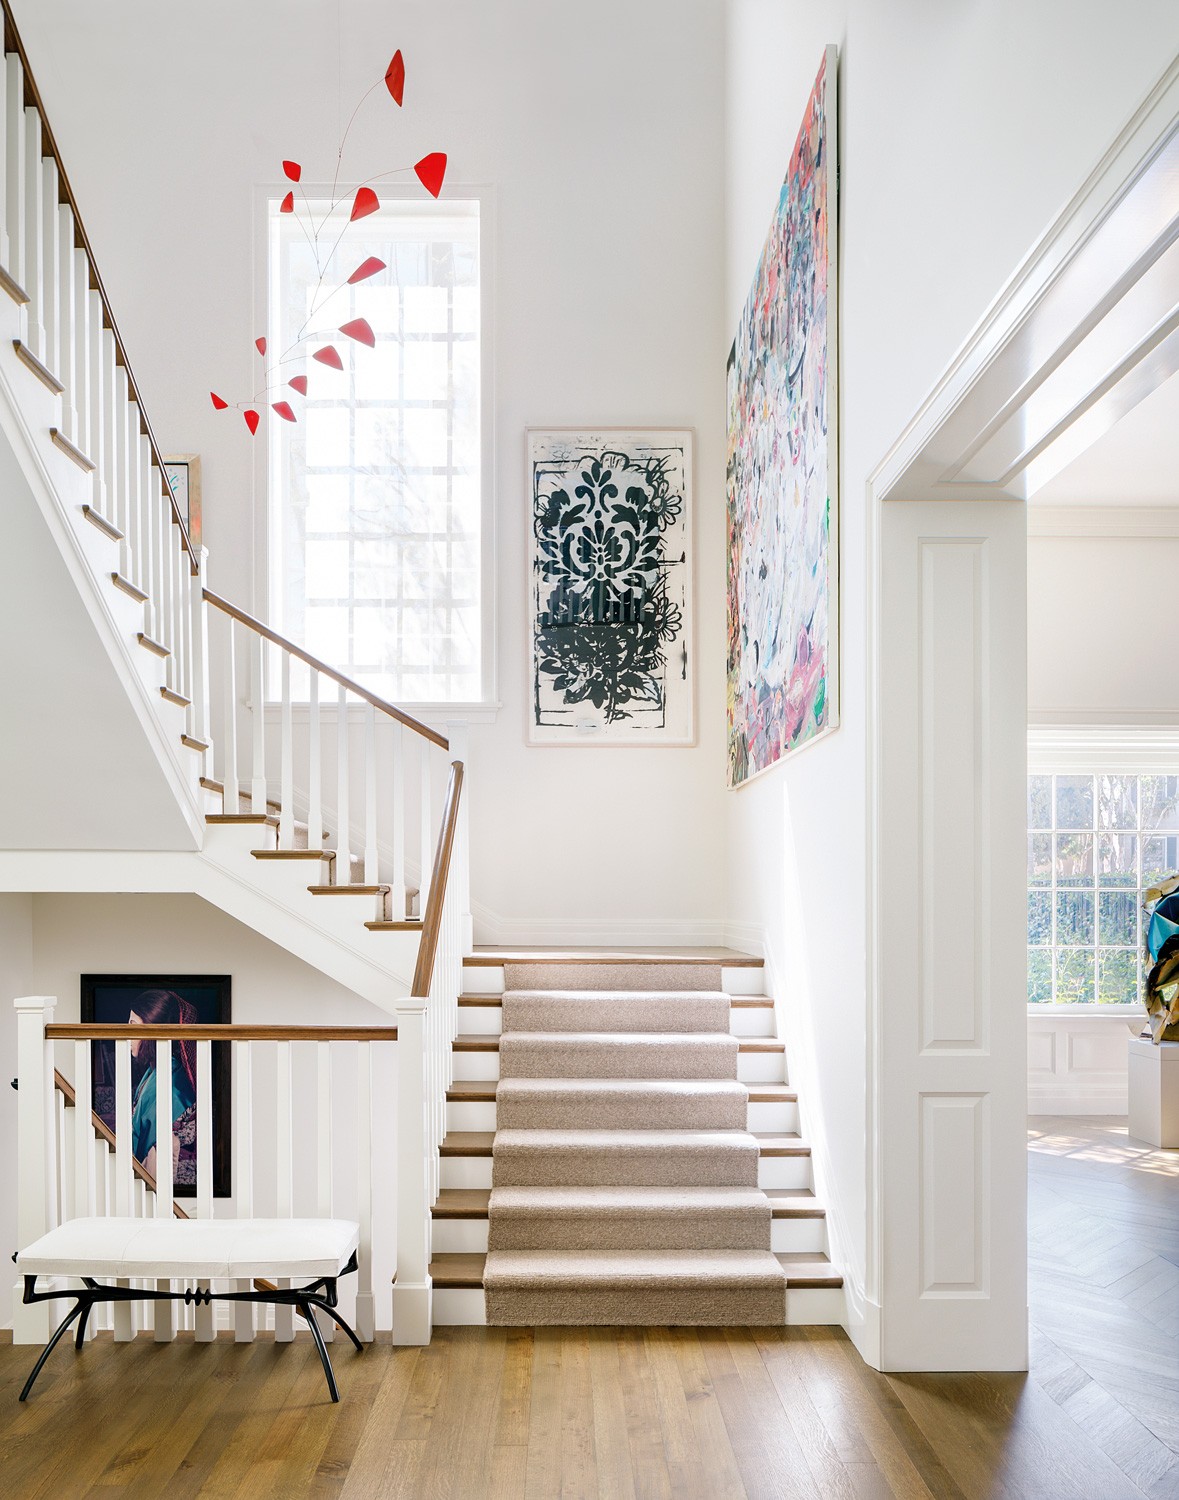 A Calder mobile suspends over a staircase in a La Jolla home designed by Madeline Stuart.